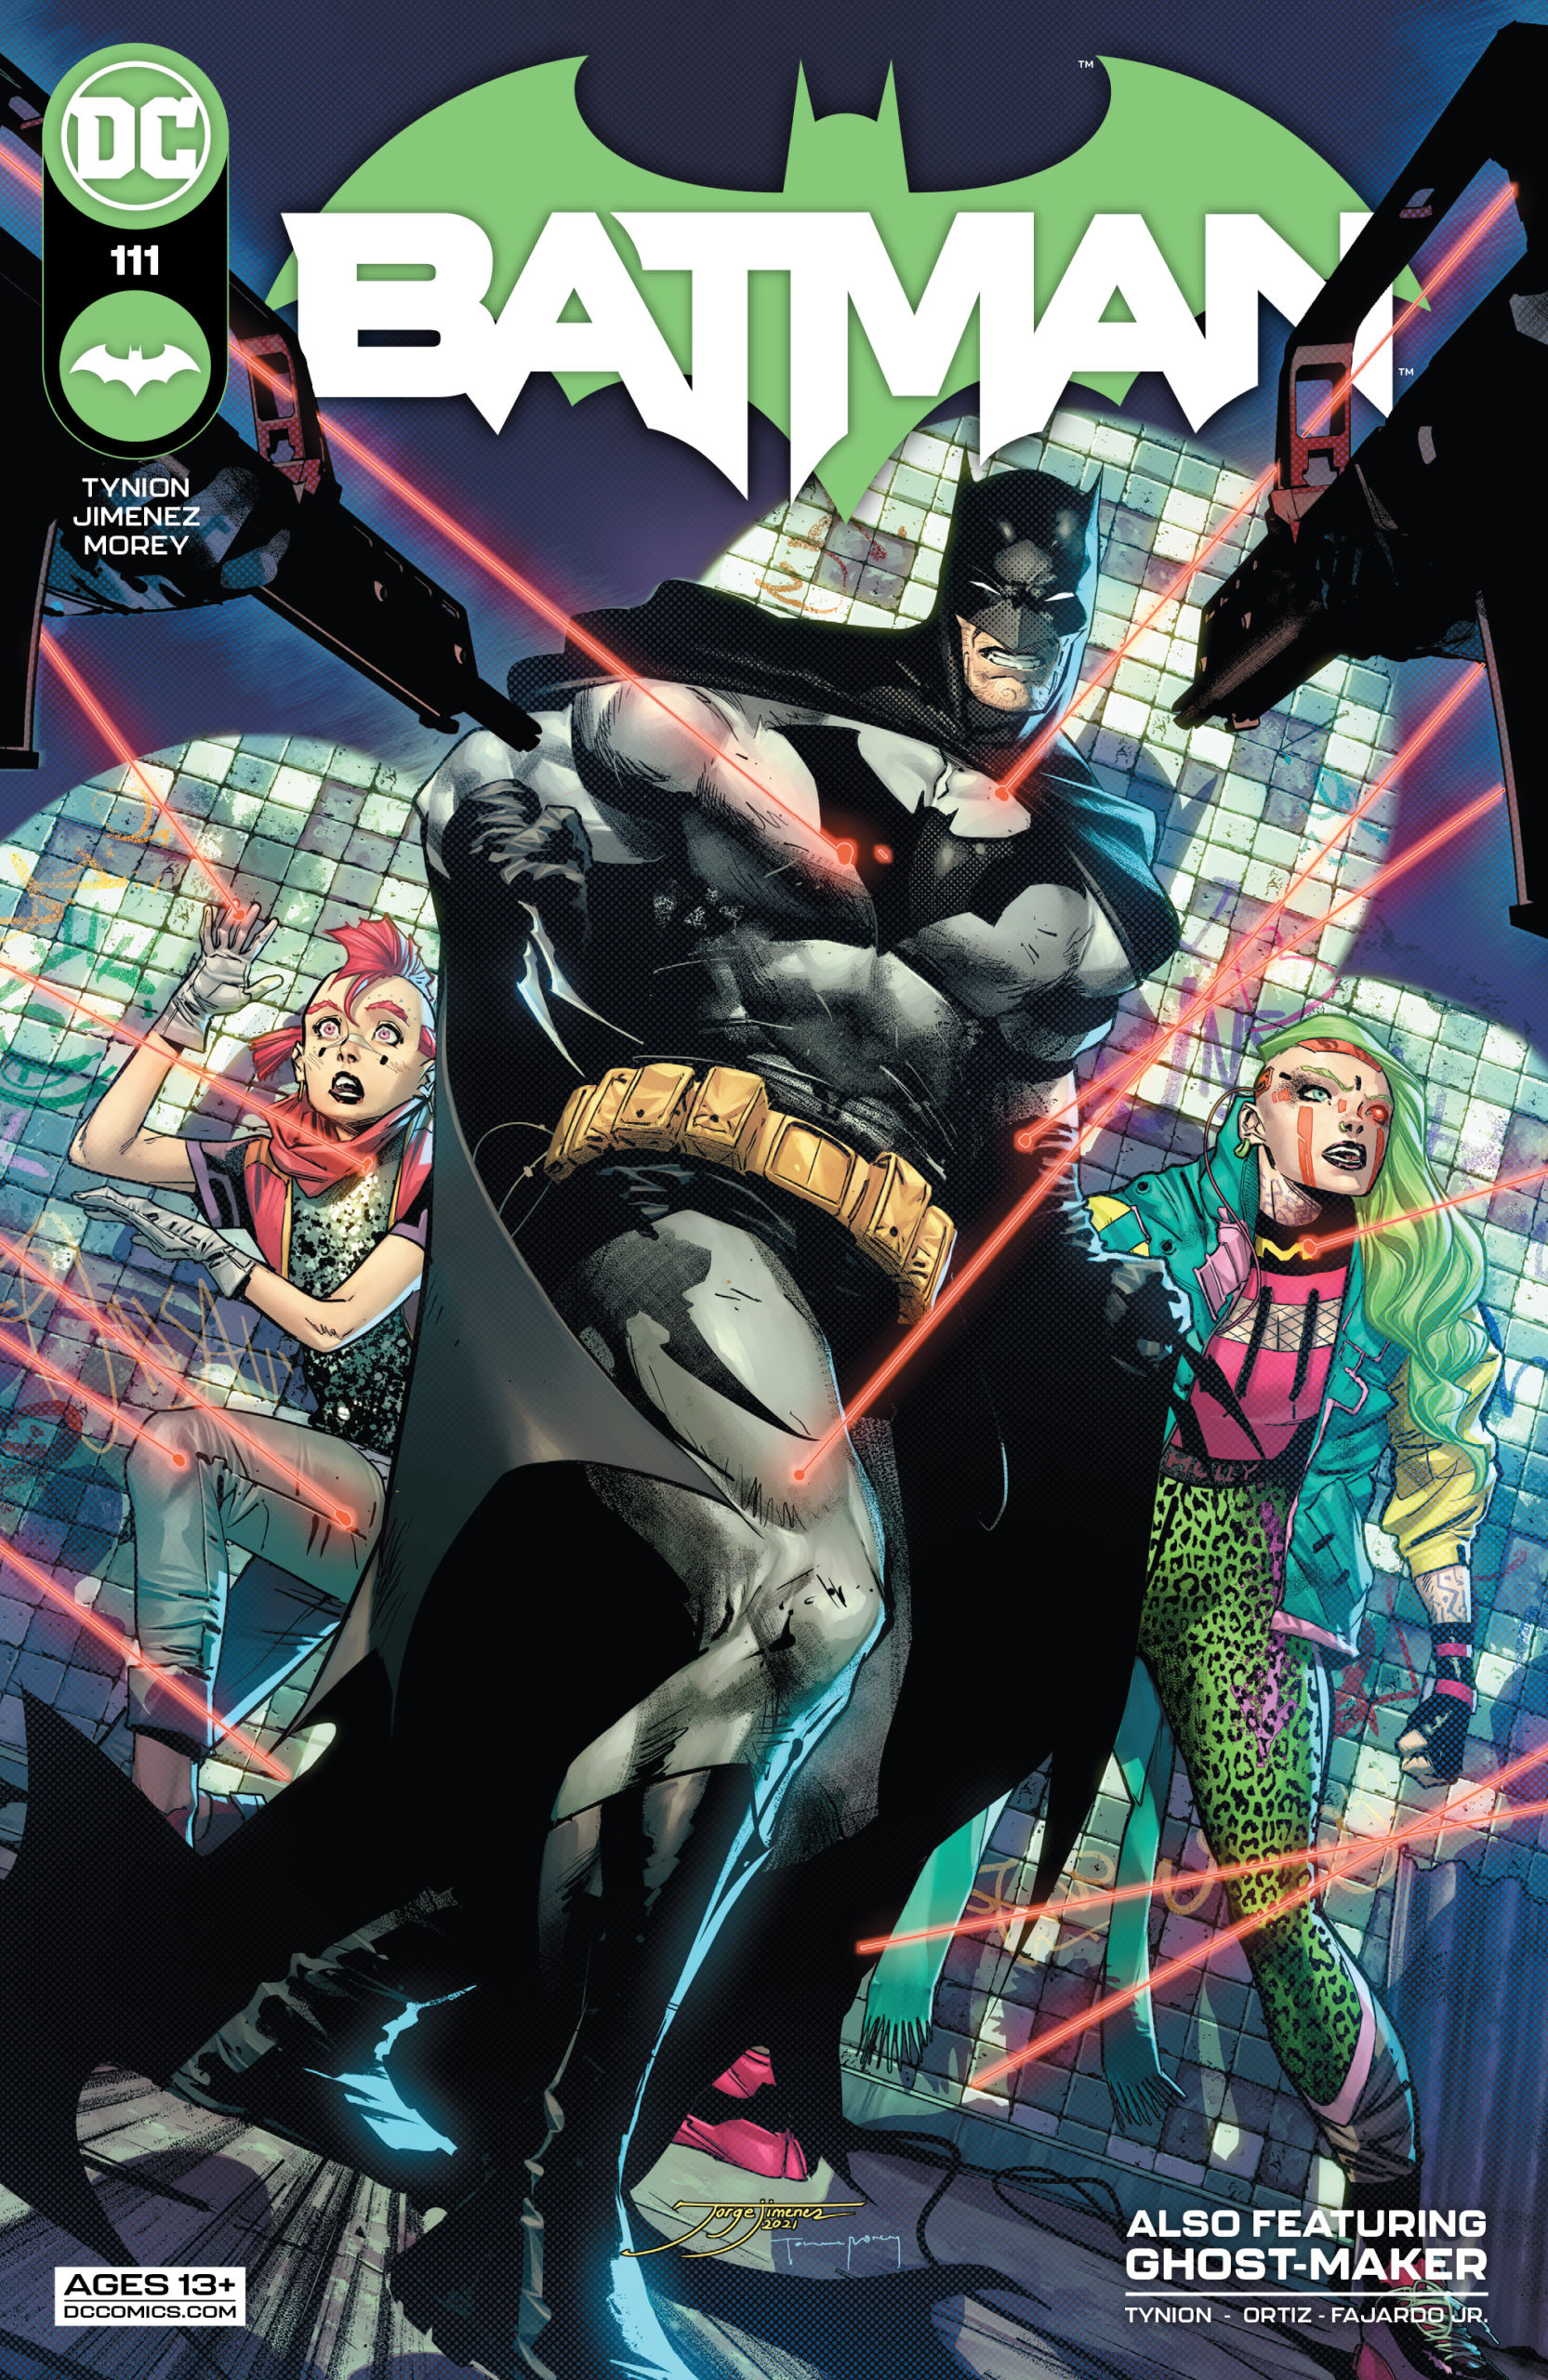 James Tynion to Leave 'Batman' After Issue #117 - Dark Knight News